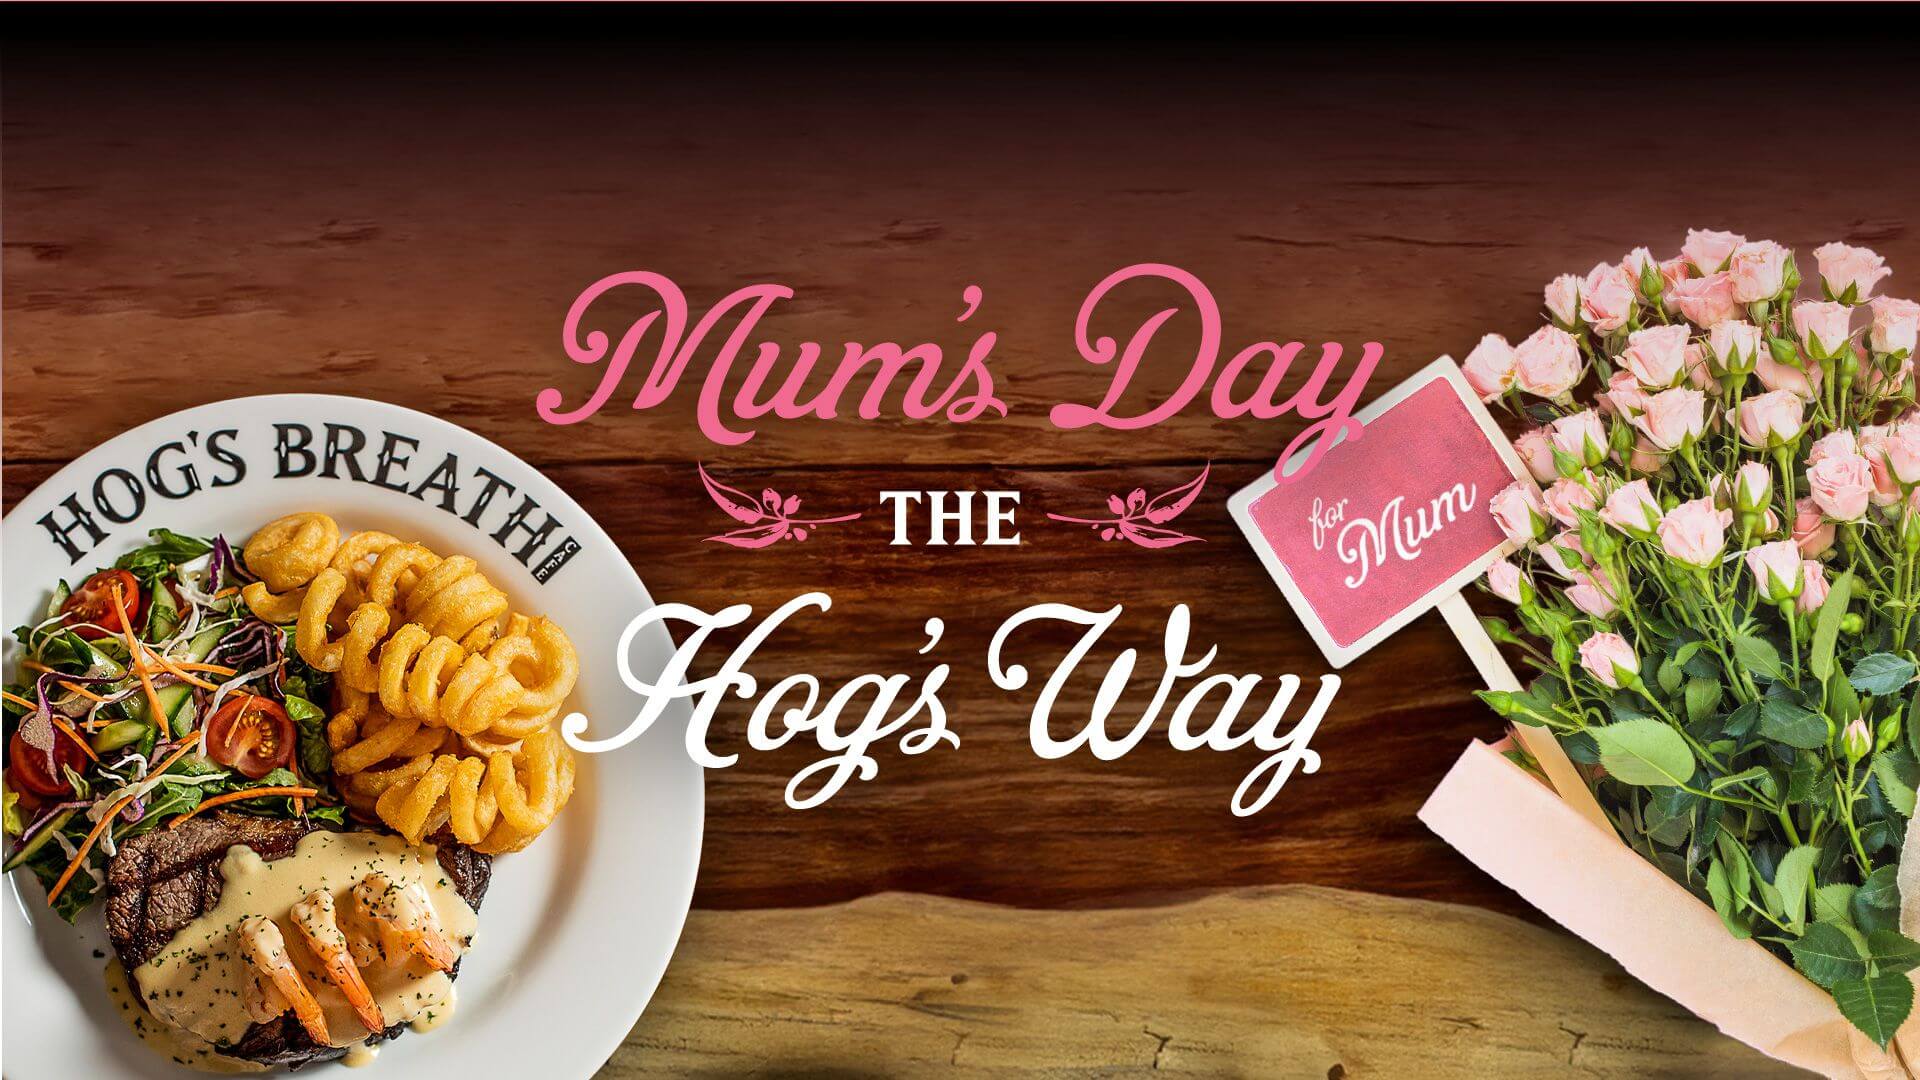 Celebrate Mother's Day The Hog's Breath Way